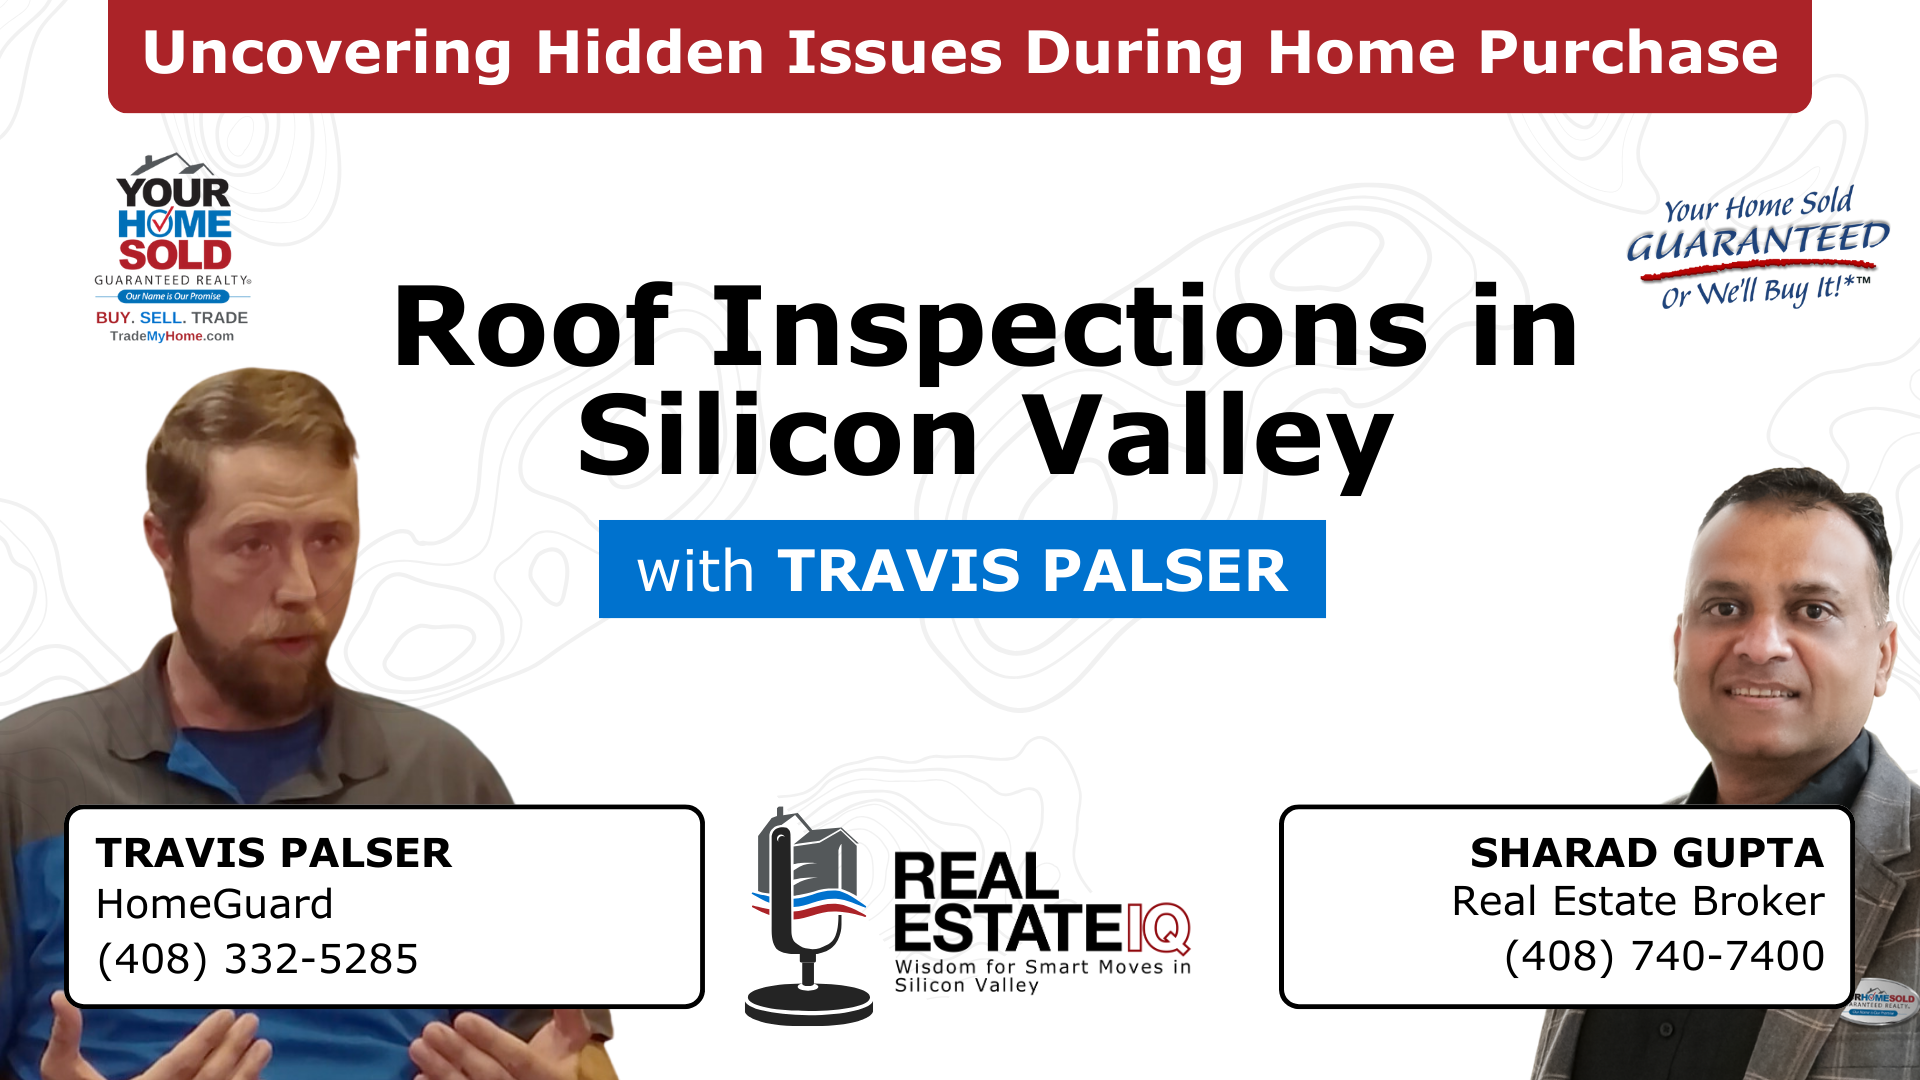 Roof Inspections: Uncovering Hidden Issues During Home Purchase in Silicon Valley